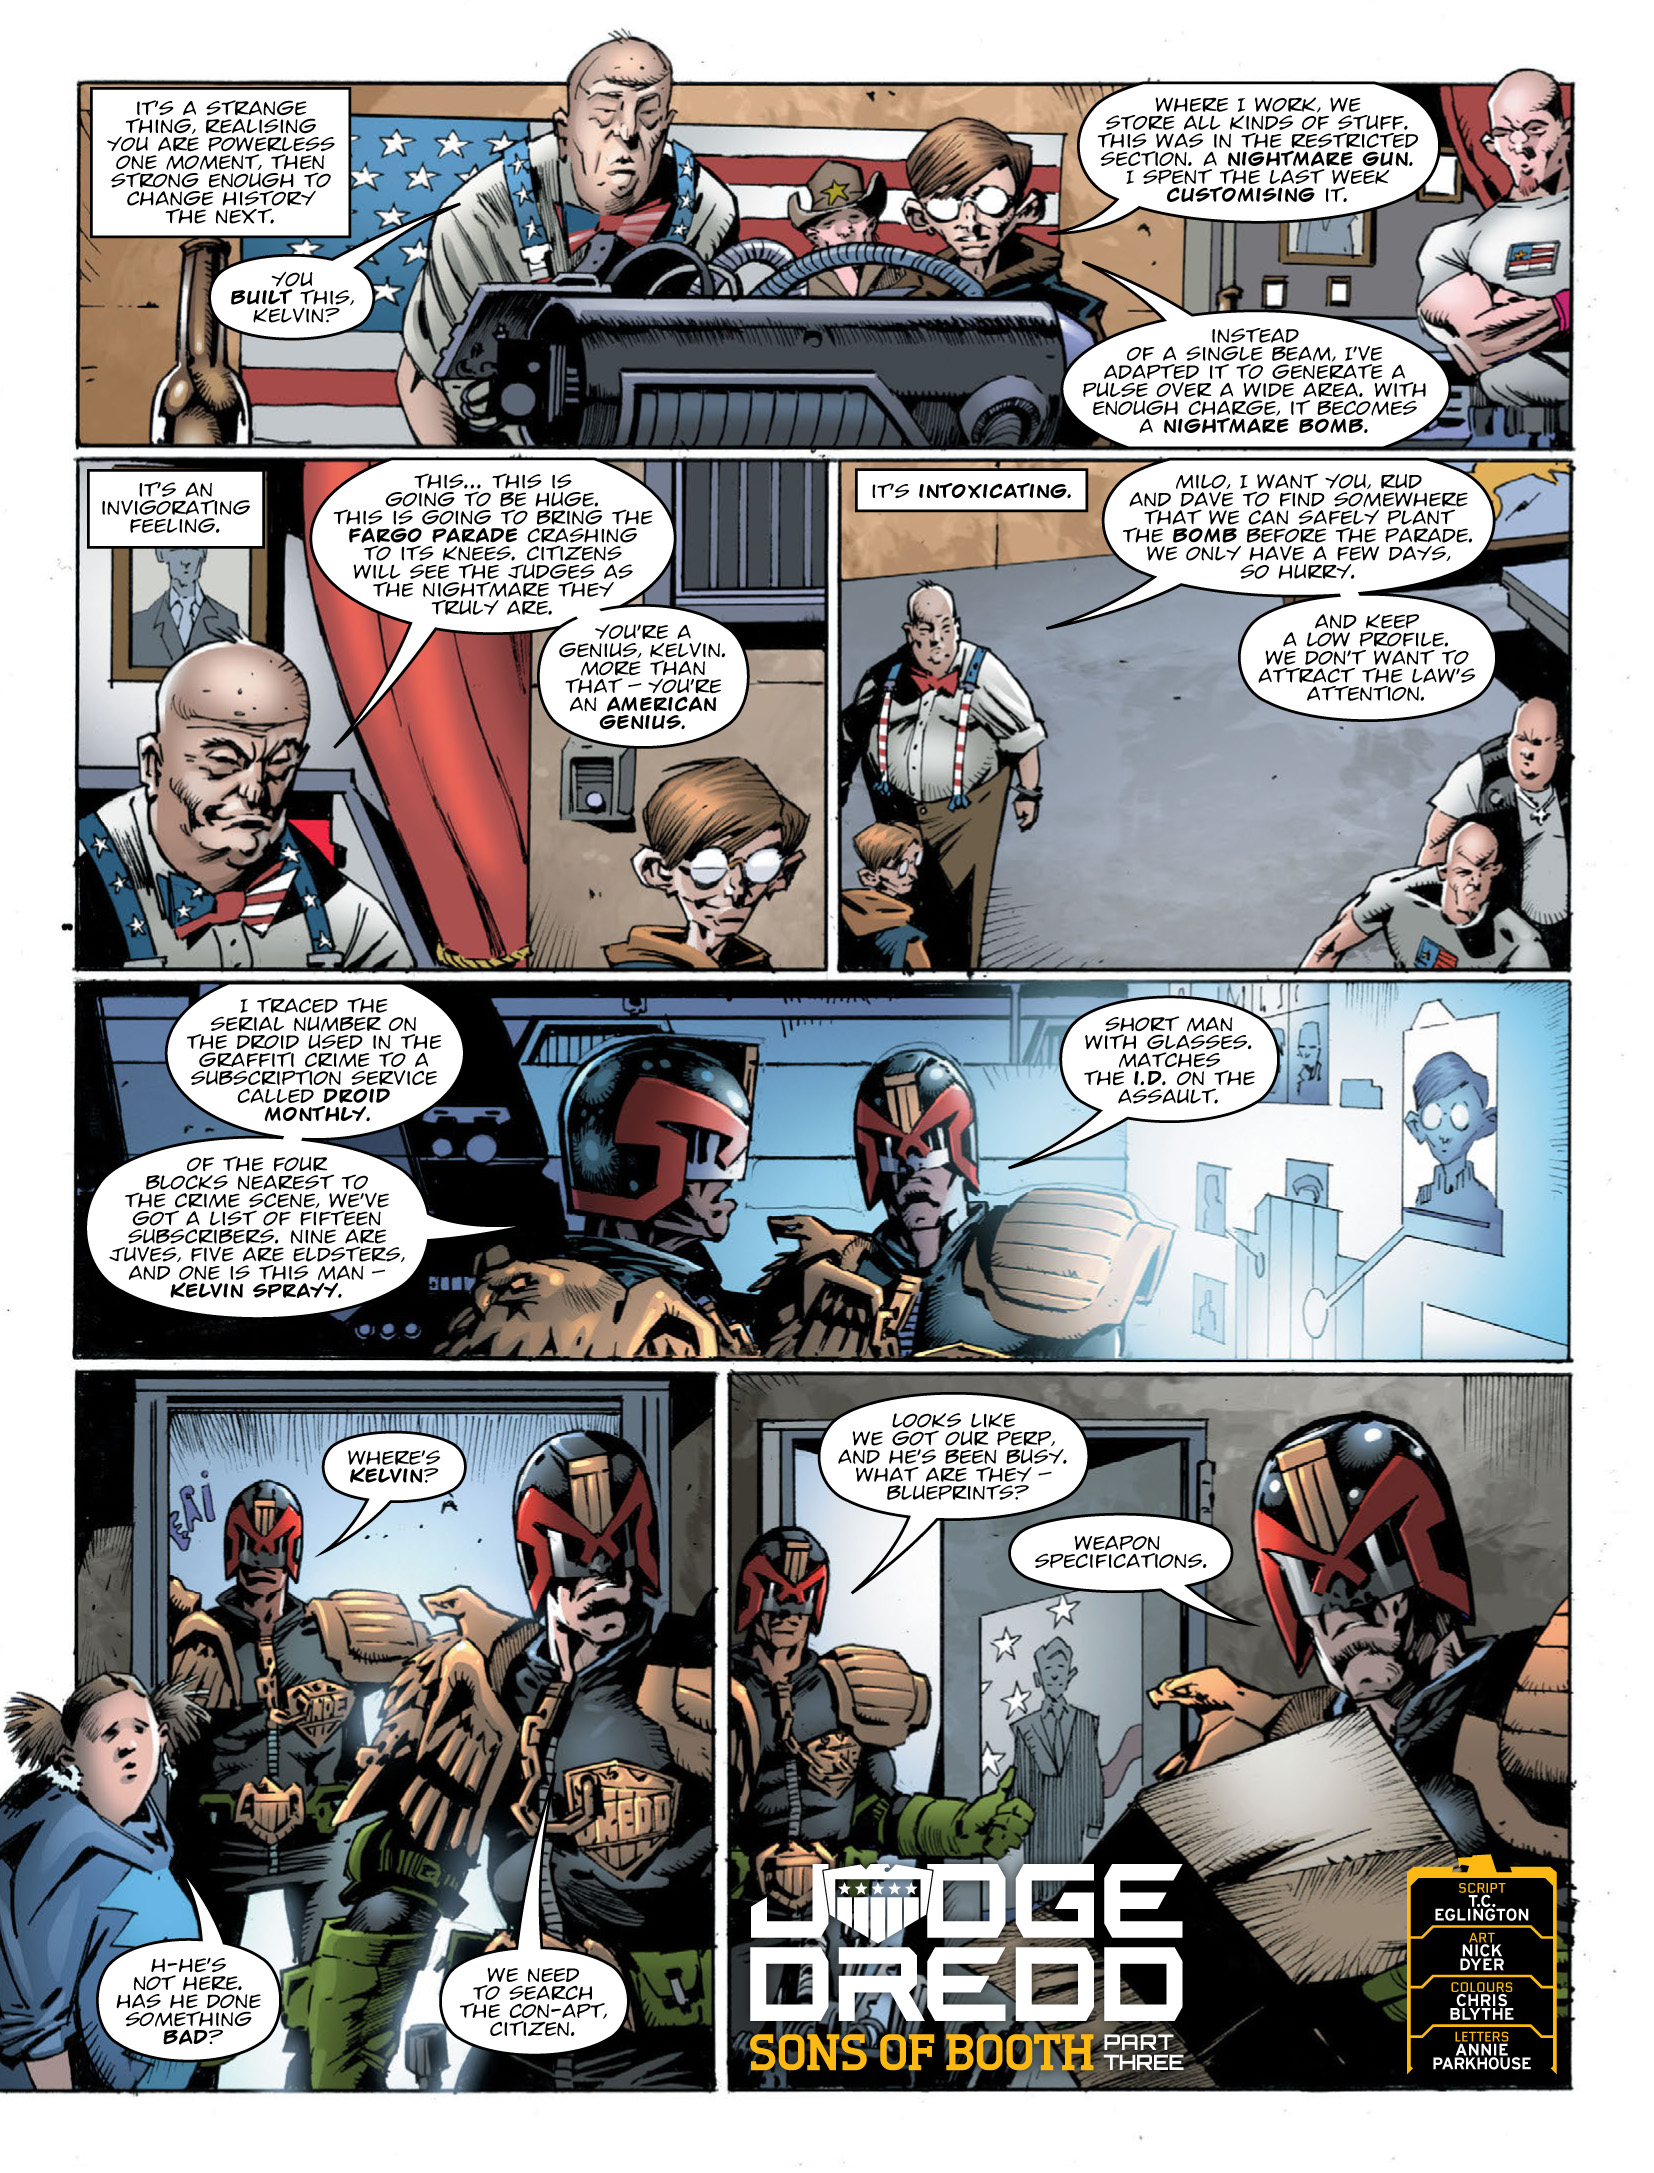 2000 AD: Chapter 2032 - Page 3